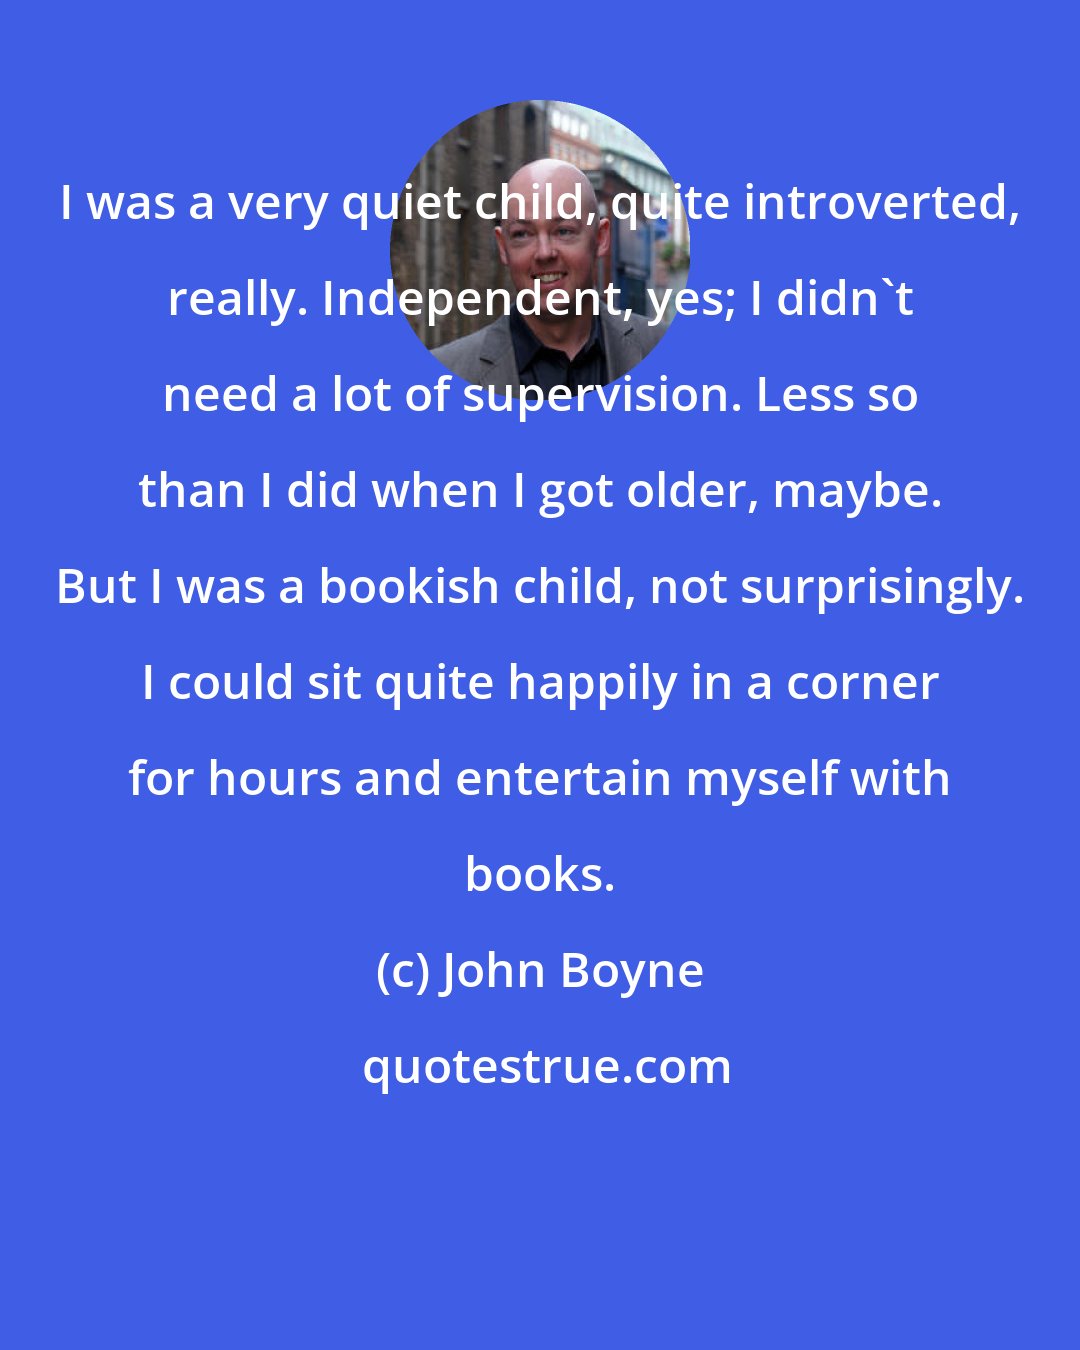 John Boyne: I was a very quiet child, quite introverted, really. Independent, yes; I didn't need a lot of supervision. Less so than I did when I got older, maybe. But I was a bookish child, not surprisingly. I could sit quite happily in a corner for hours and entertain myself with books.